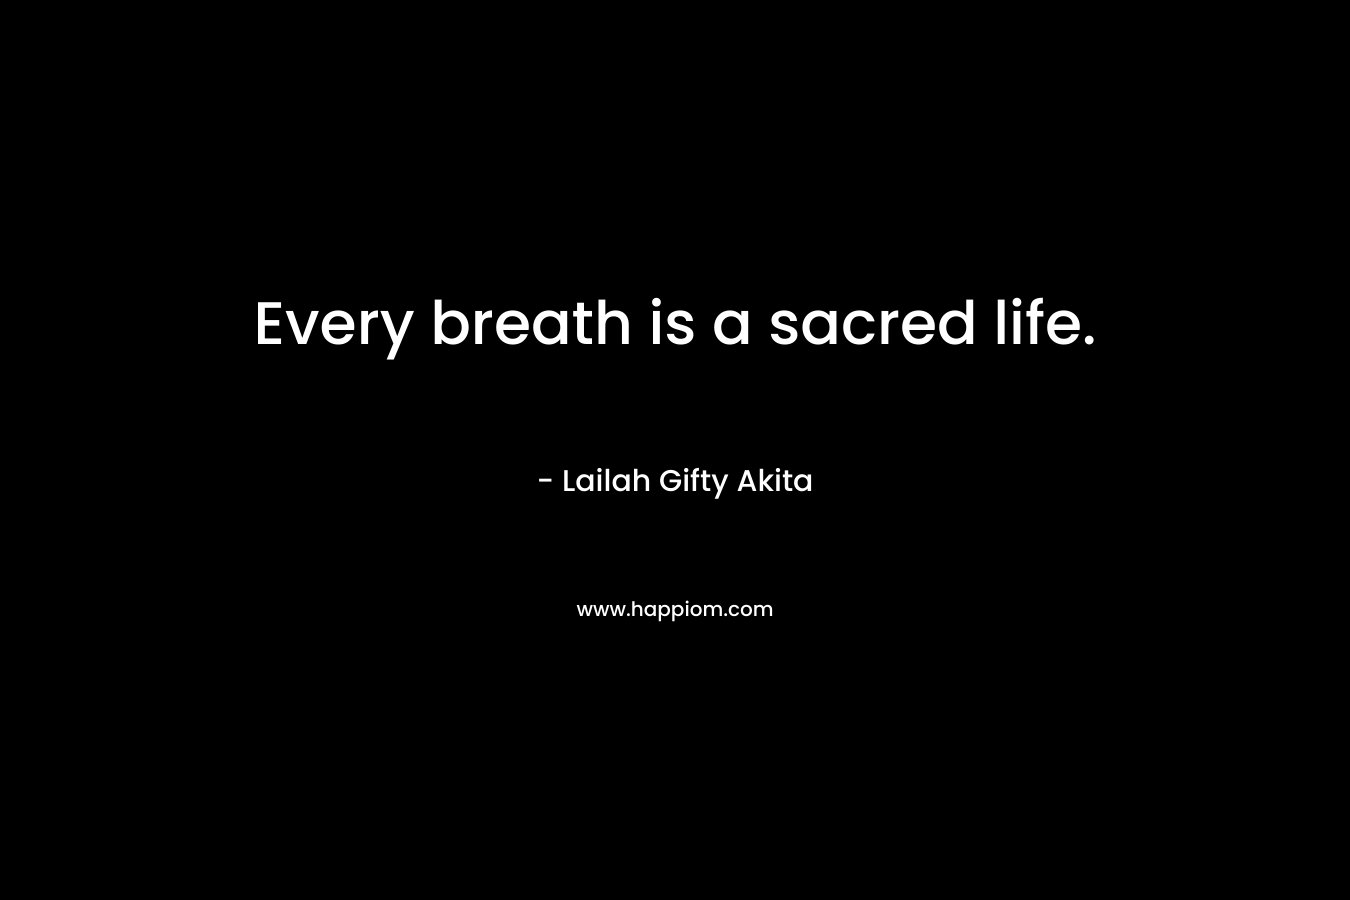 Every breath is a sacred life.